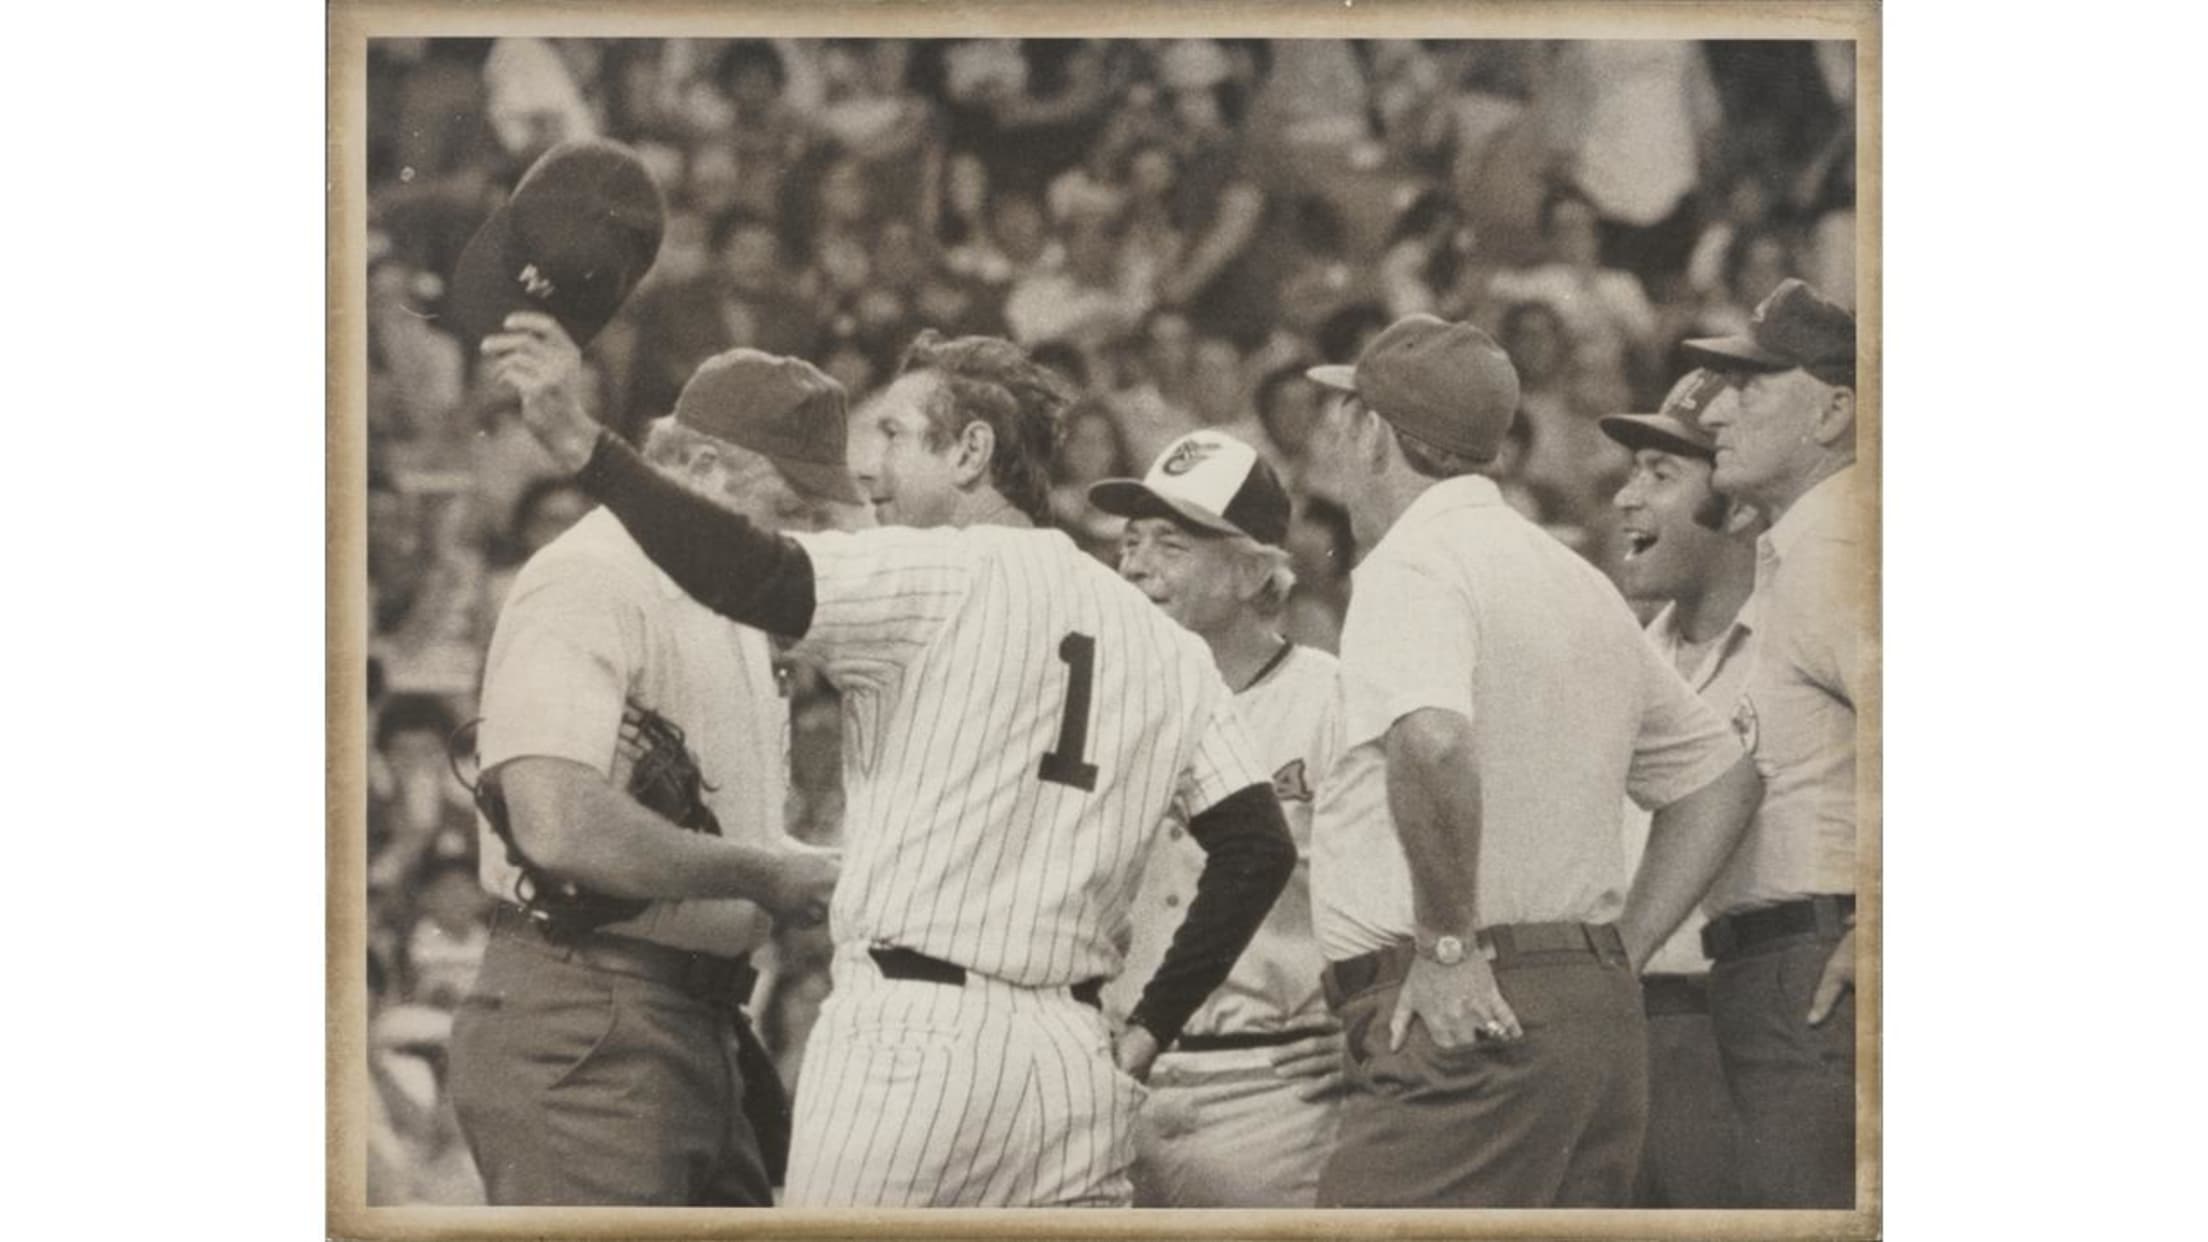 What if the New York Yankees never retired Billy Martin's #1?